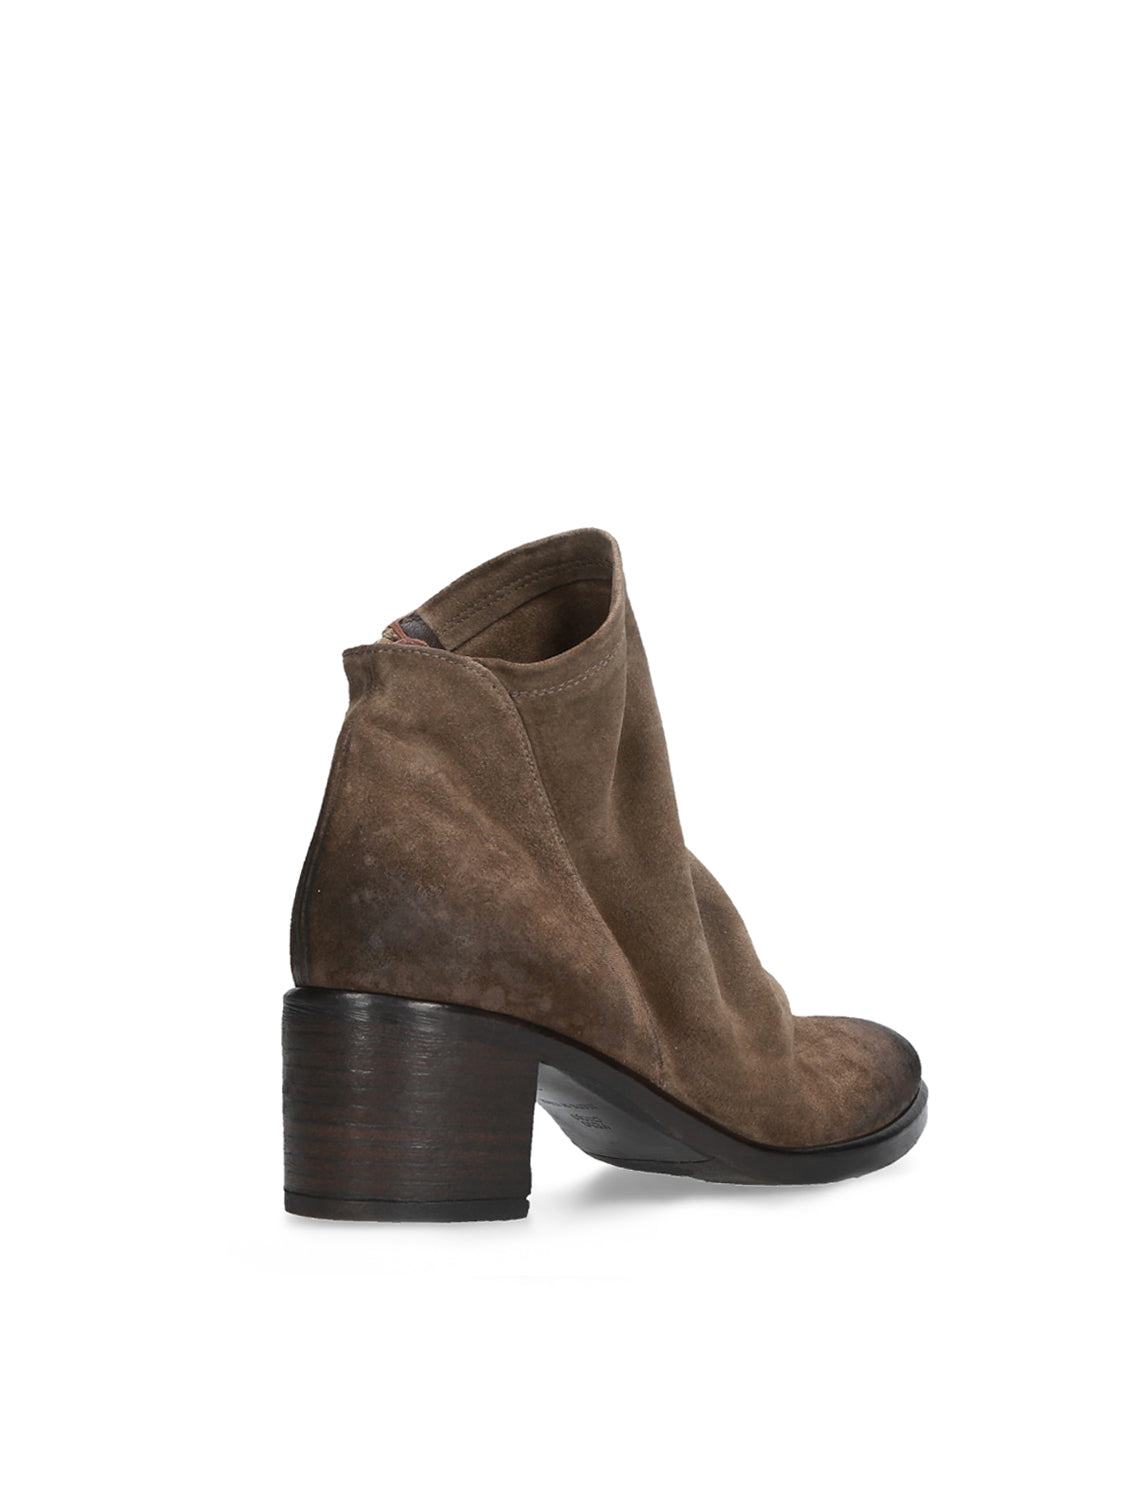 SAND ANKLE BOOT